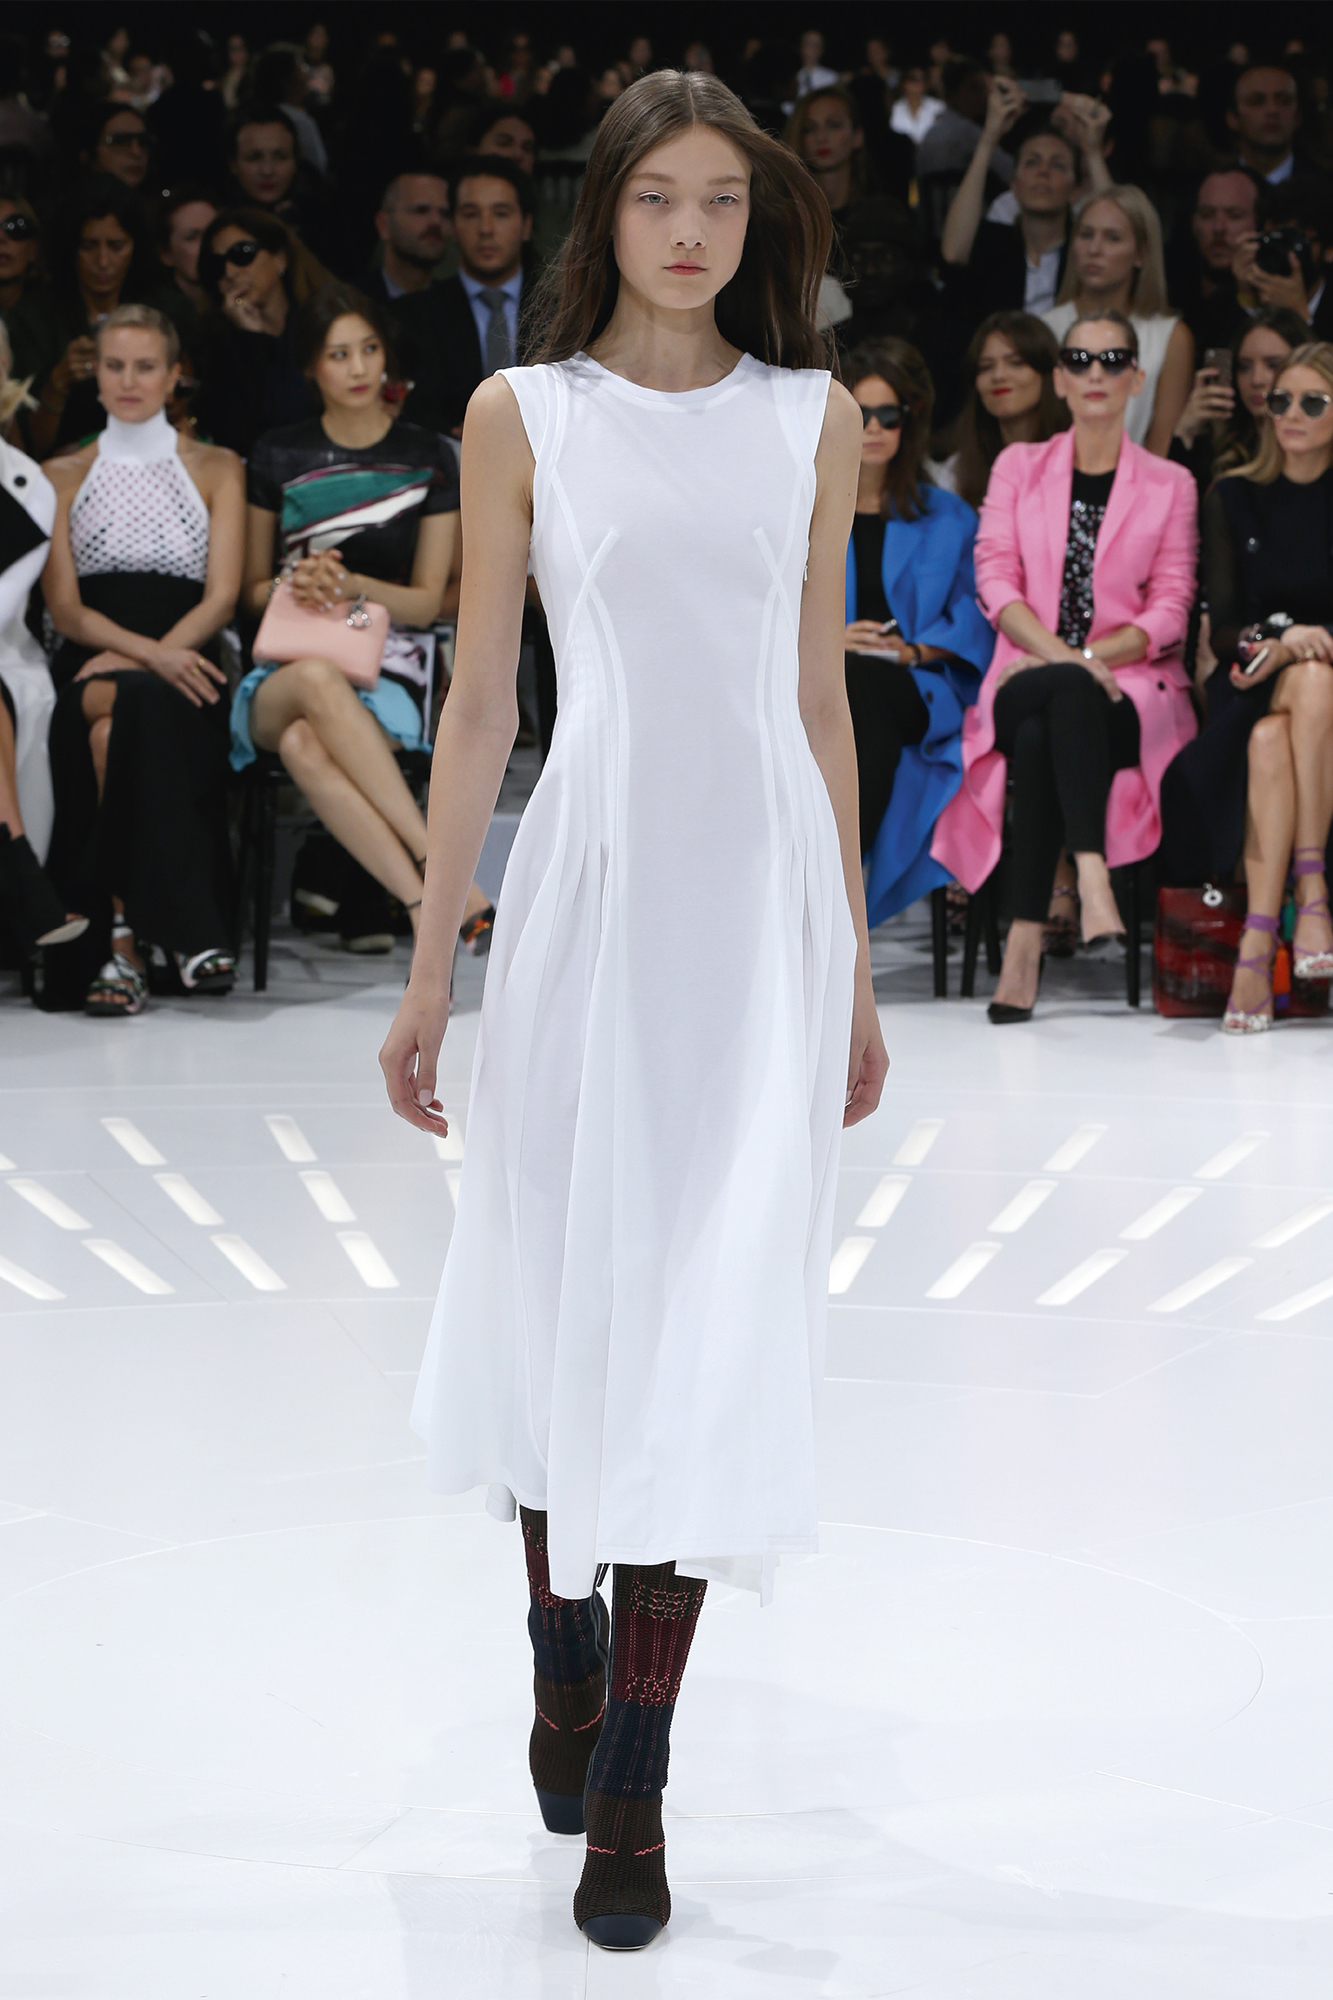 Christian Dior Haute Couture Spring-Summer Ready To Wear Dresses & Accessories Collection 2015-16 (6)